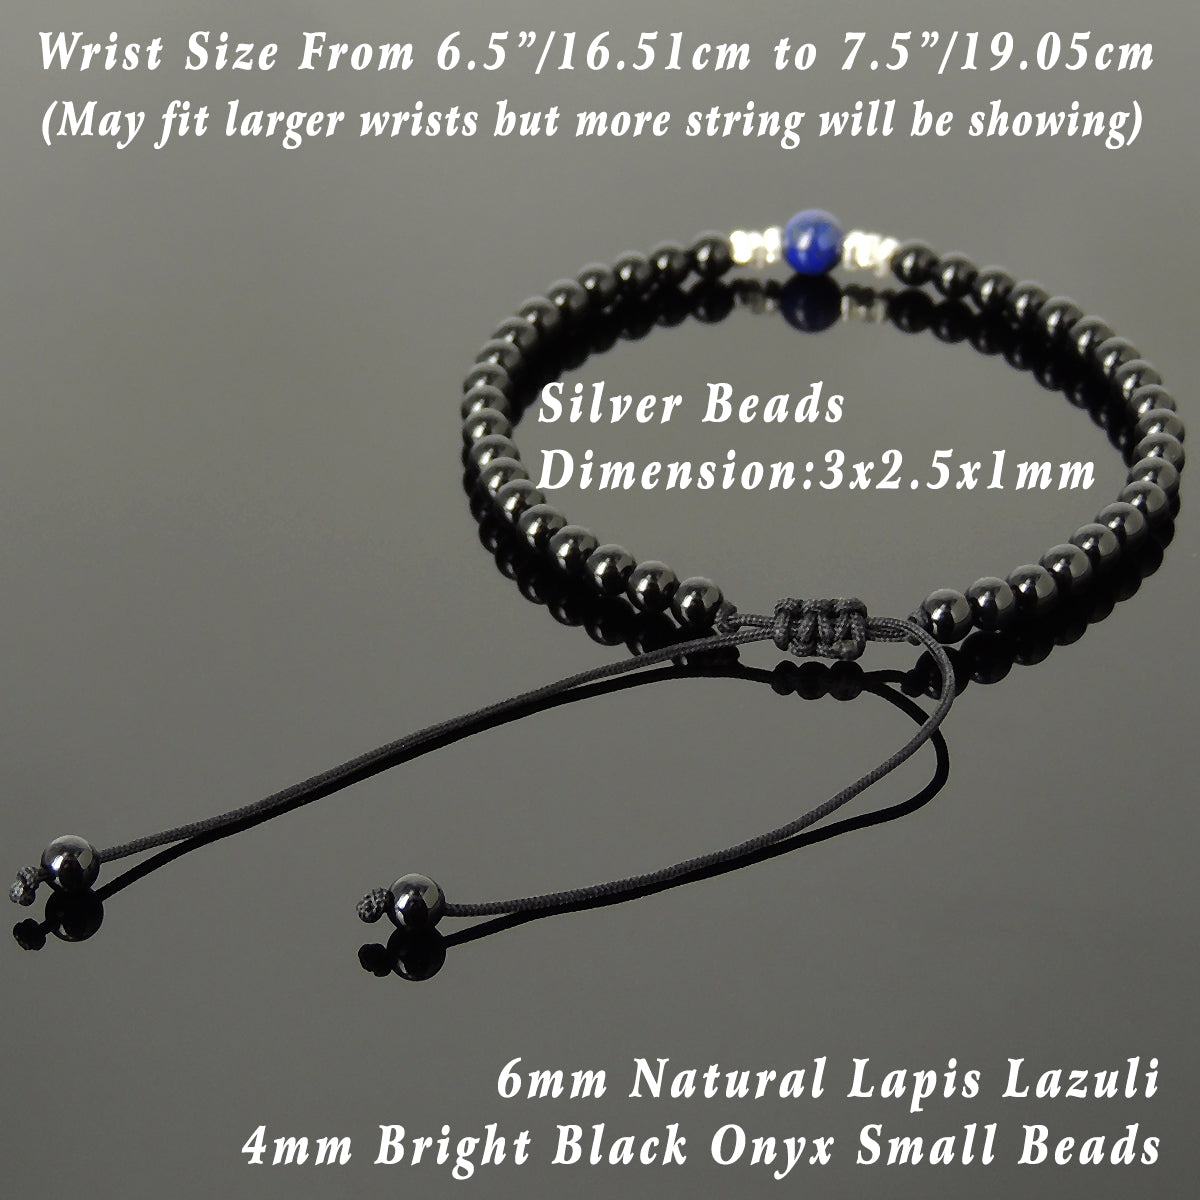 Lapis Lazuli & Bright Black Onyx Adjustable Braided Bracelet with S925 Sterling Silver Nugget Beads - Handmade by Gem & Silver BR1198